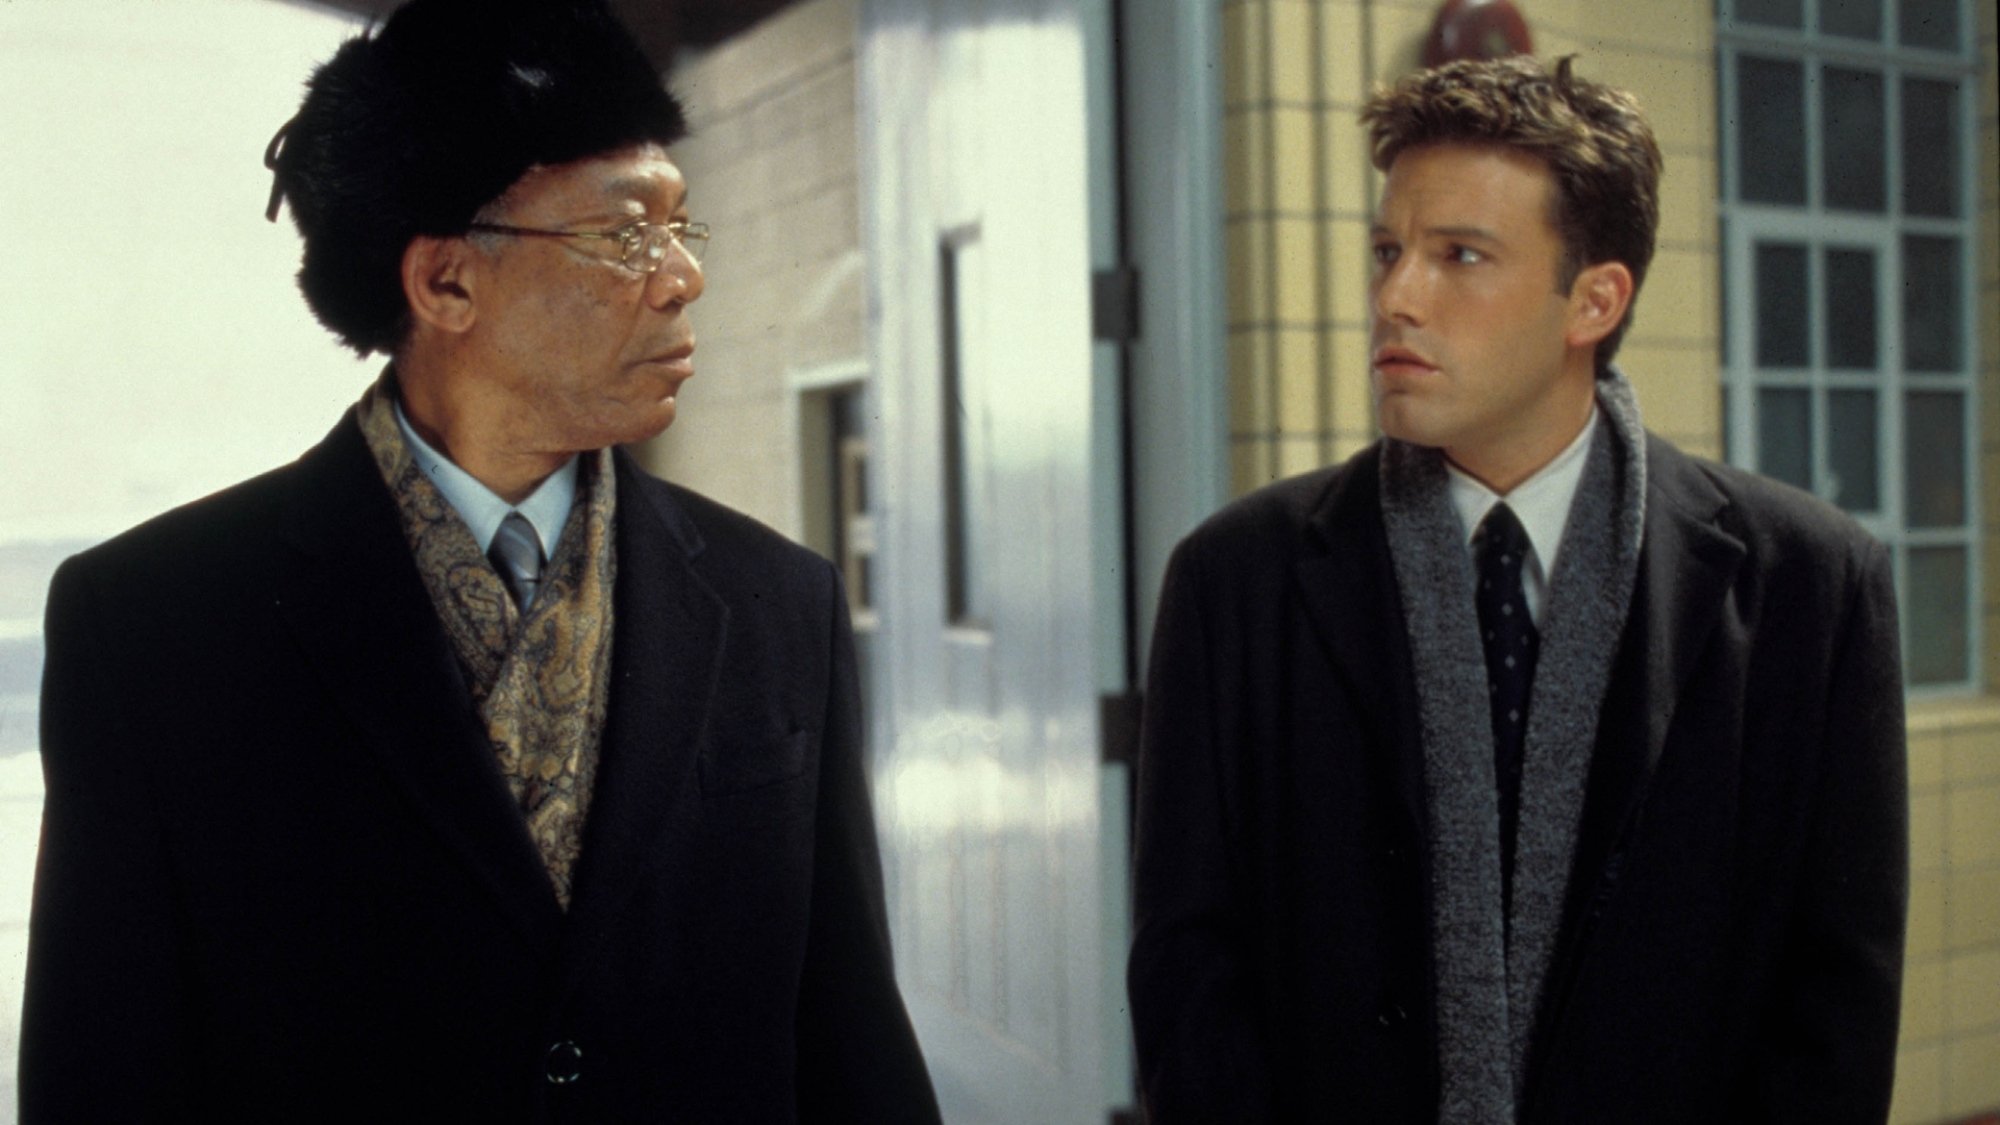 Morgan Freeman and Ben Affleck in "The Sum of All Fears."